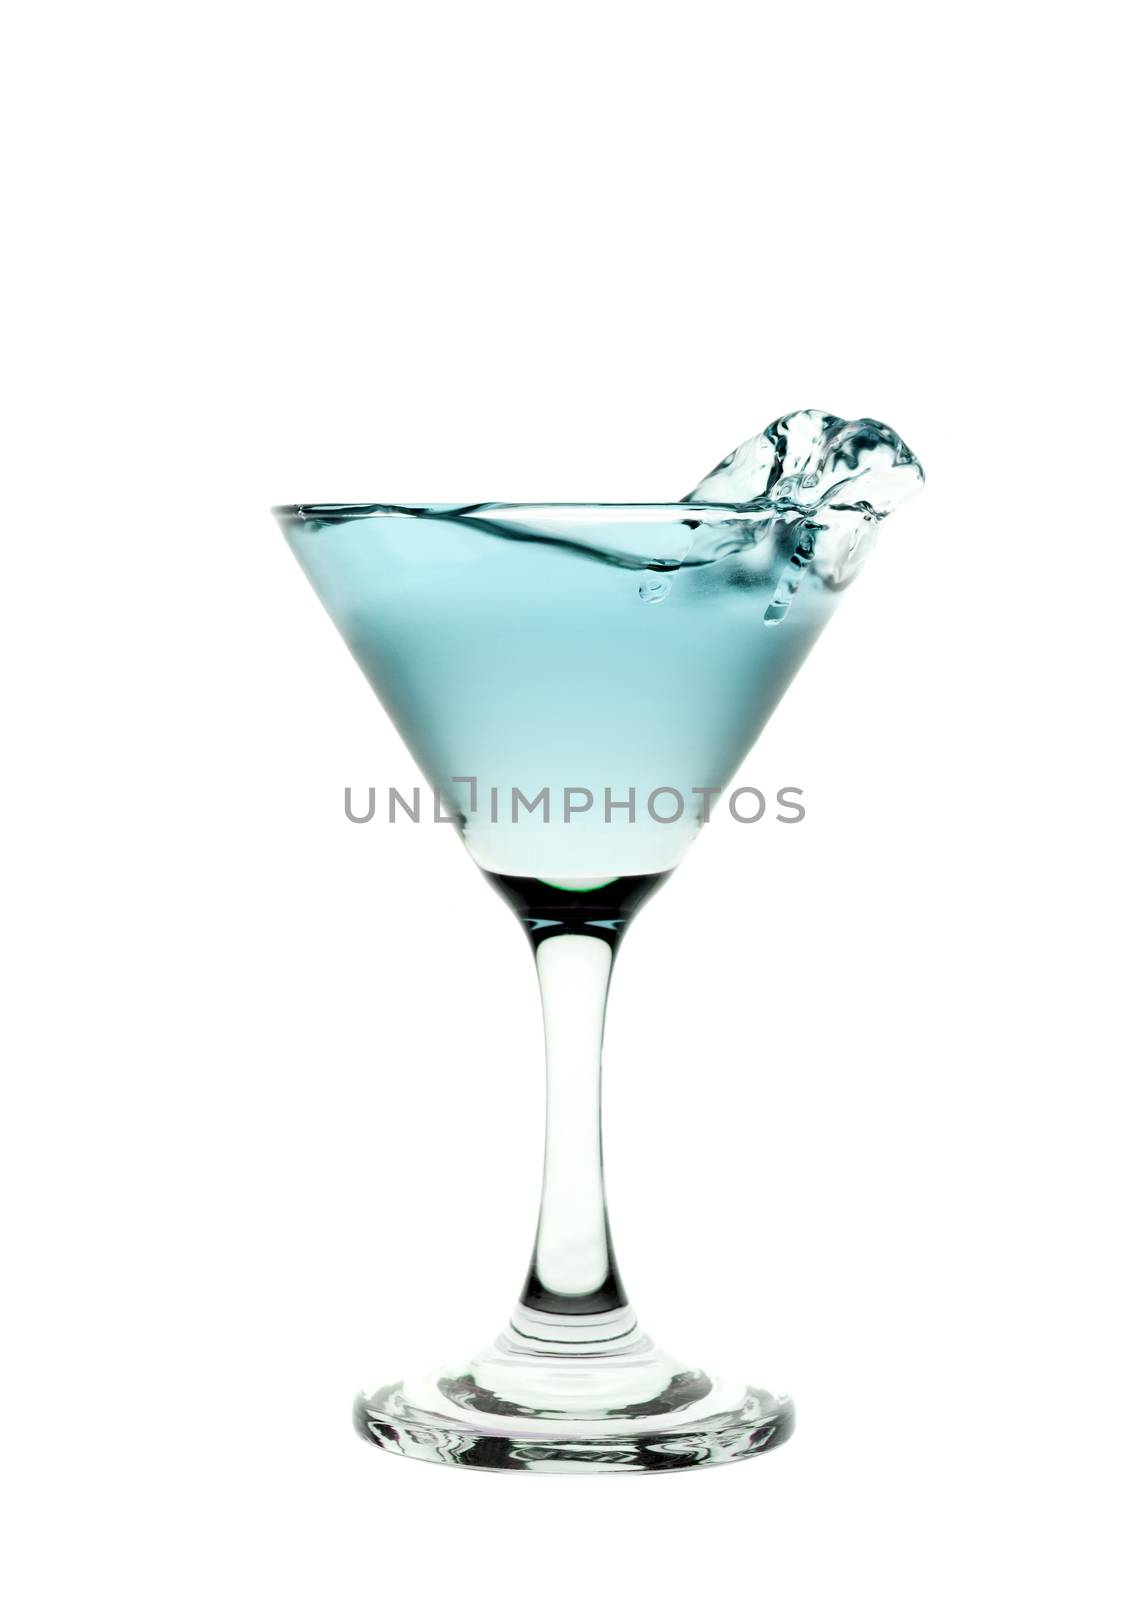 Green liquid splashing in a martini glass isolated on white background